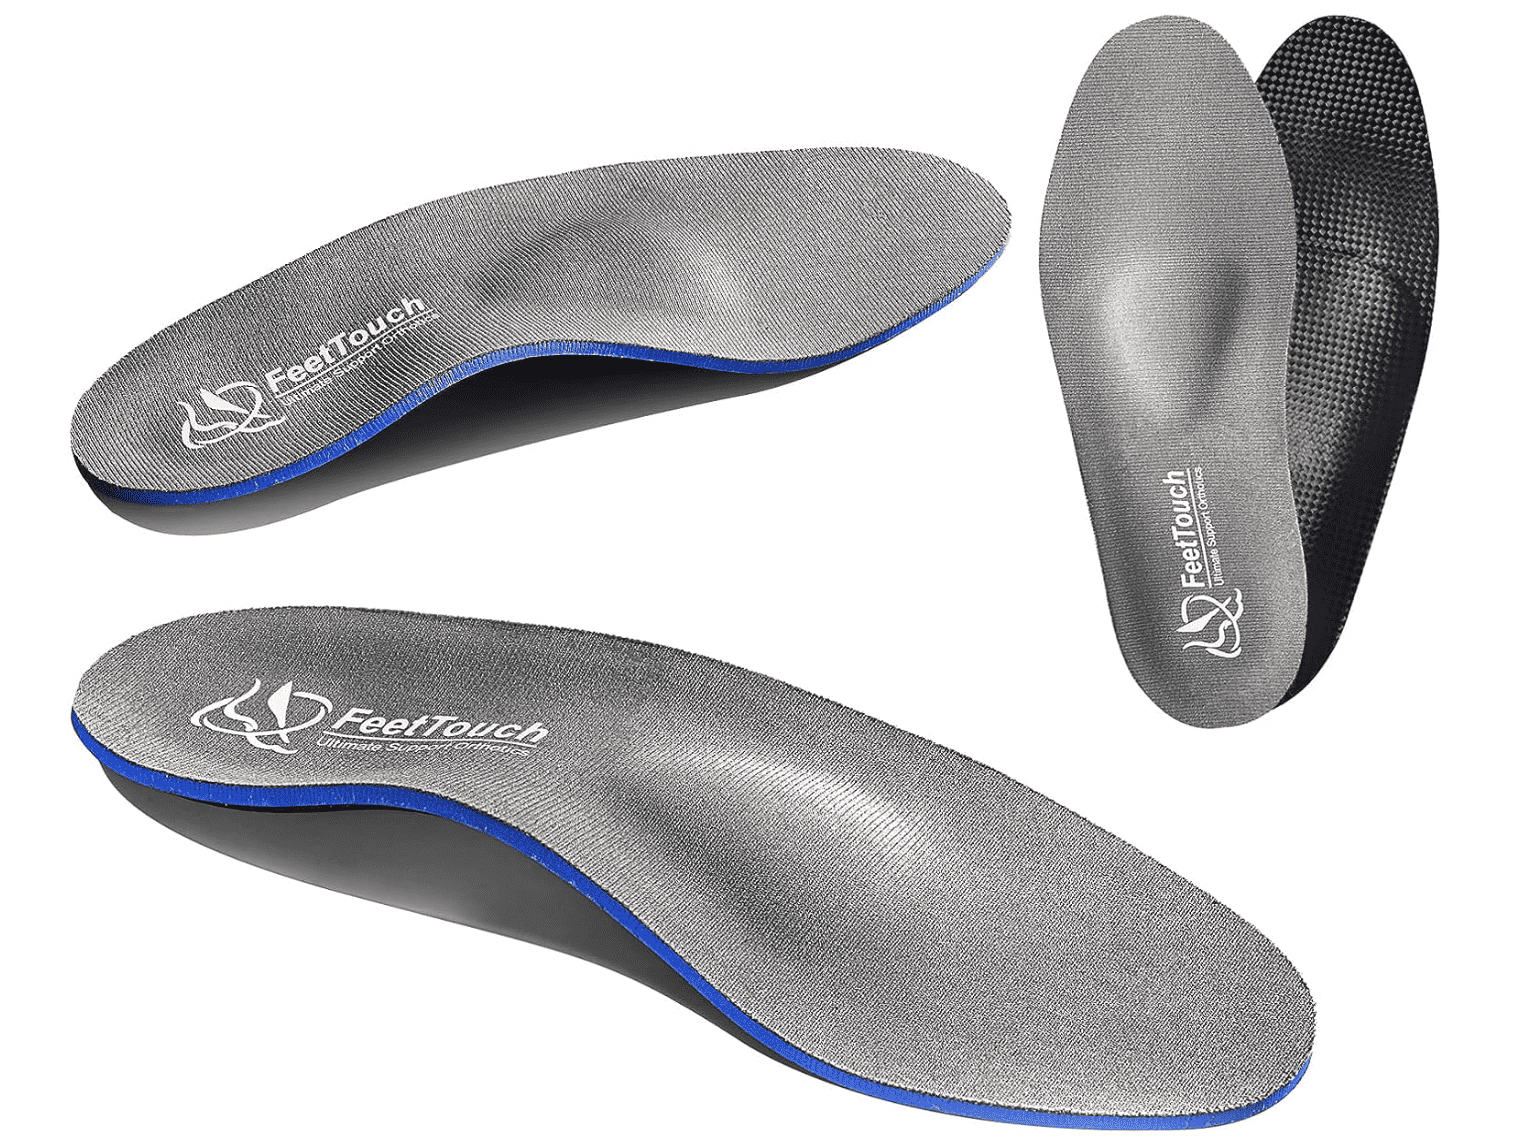 Best Metatarsalgia Insoles in 2023 recommended by a Foot Expert